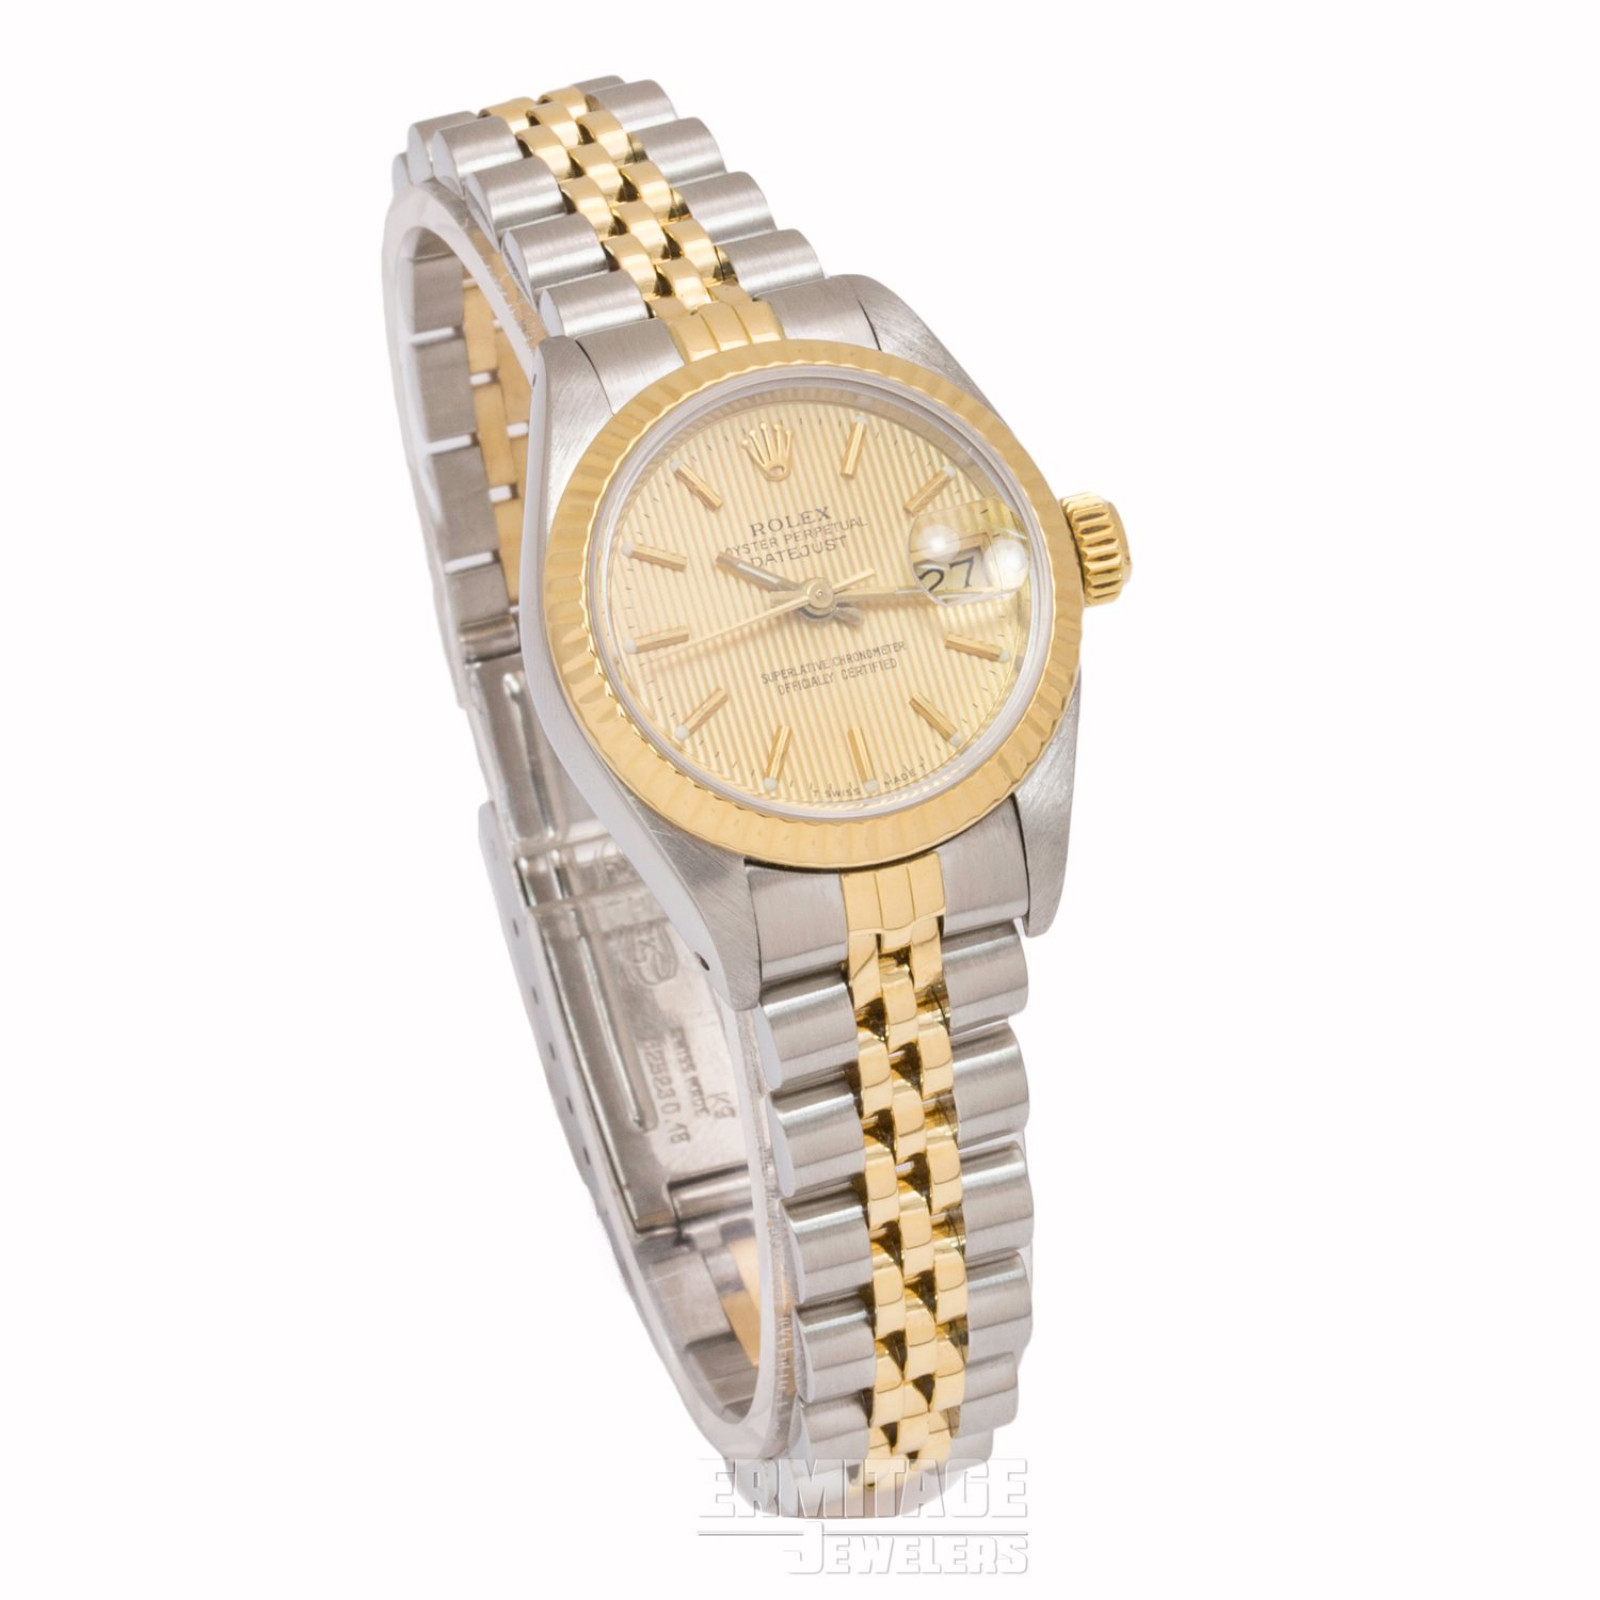 26 mm Rolex Datejust 69173 Gold & Steel on Jubilee with Champagne Dial